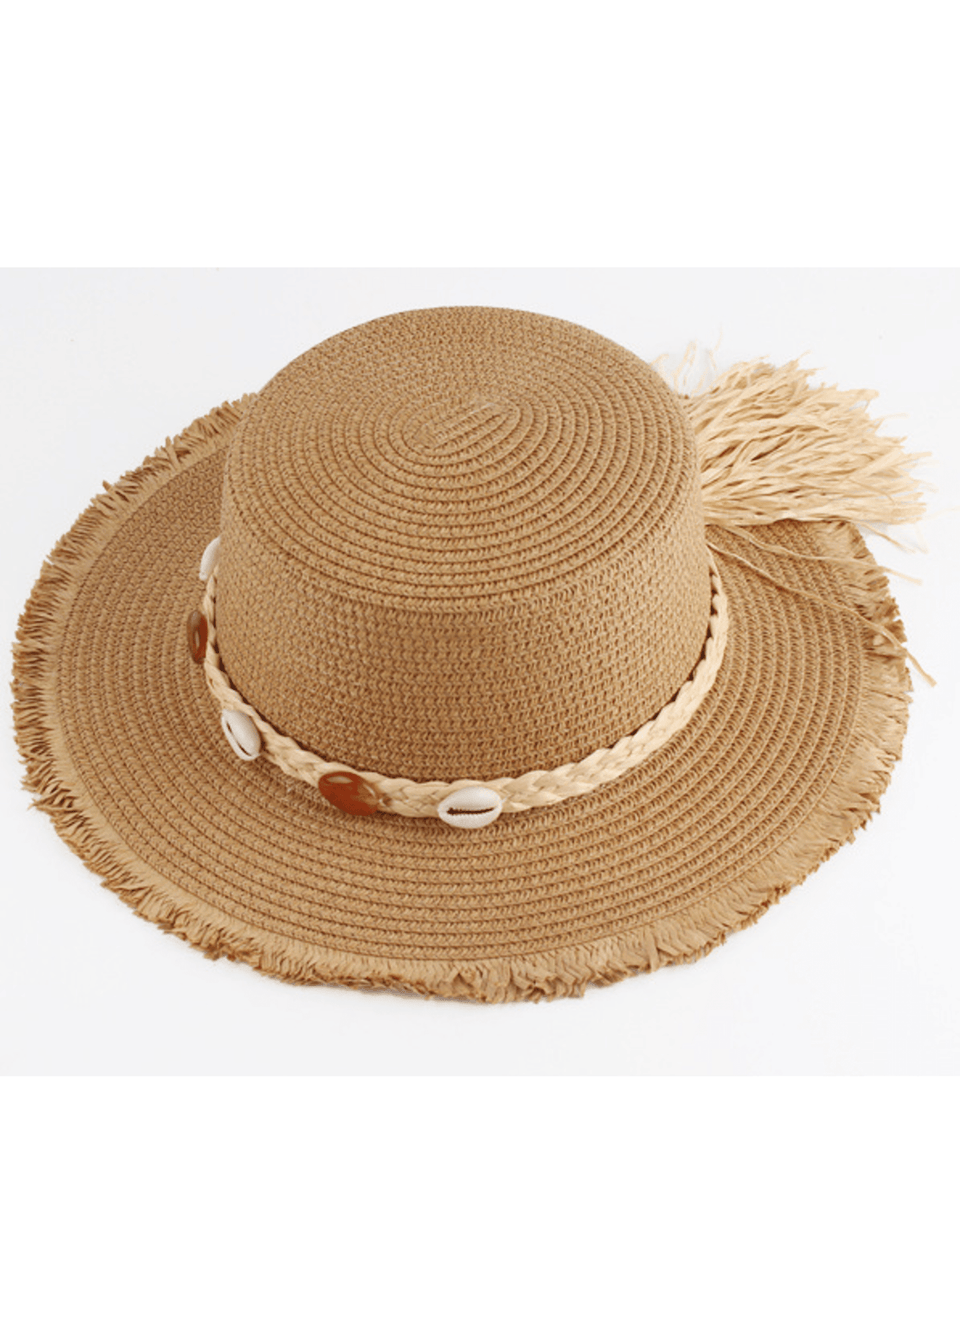 Madein Straw Boater Hat With Detailed Trim And Frayed Edge